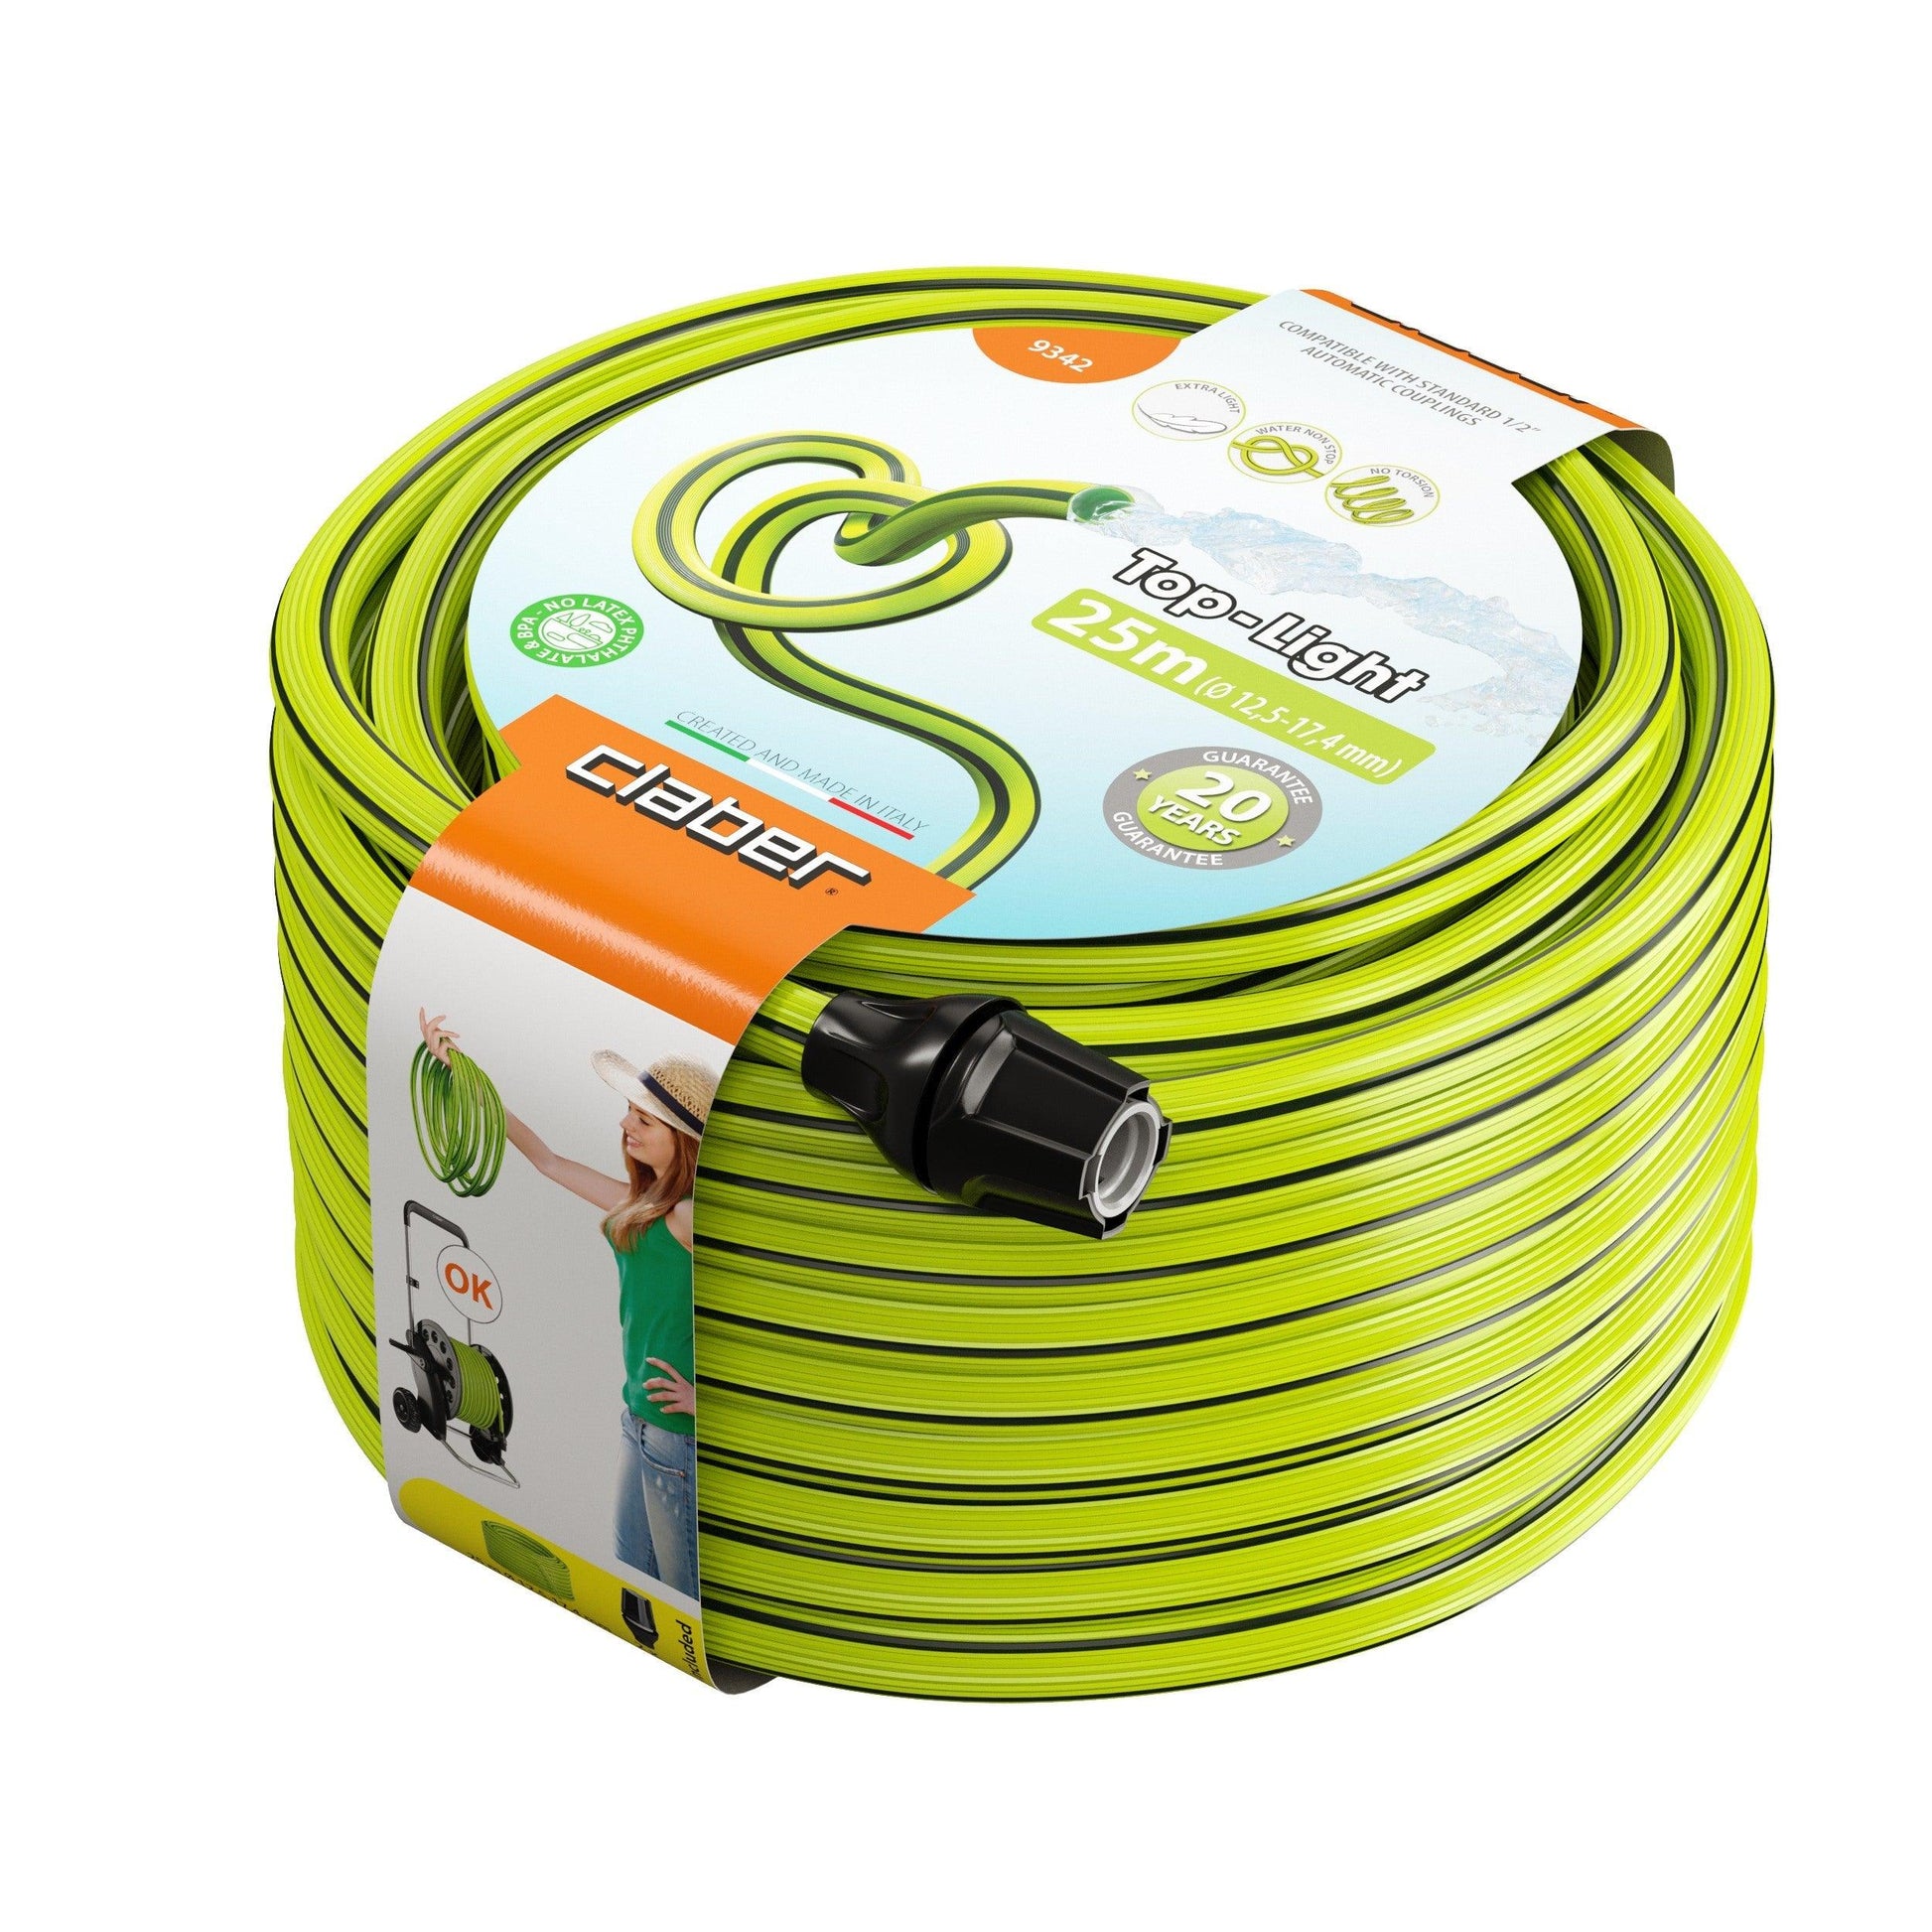 CLABER ½” Top-Light Lightweight Hose 25m With Connectors - Premium Garden Hose from CLABER - Just R 1104! Shop now at Securadeal